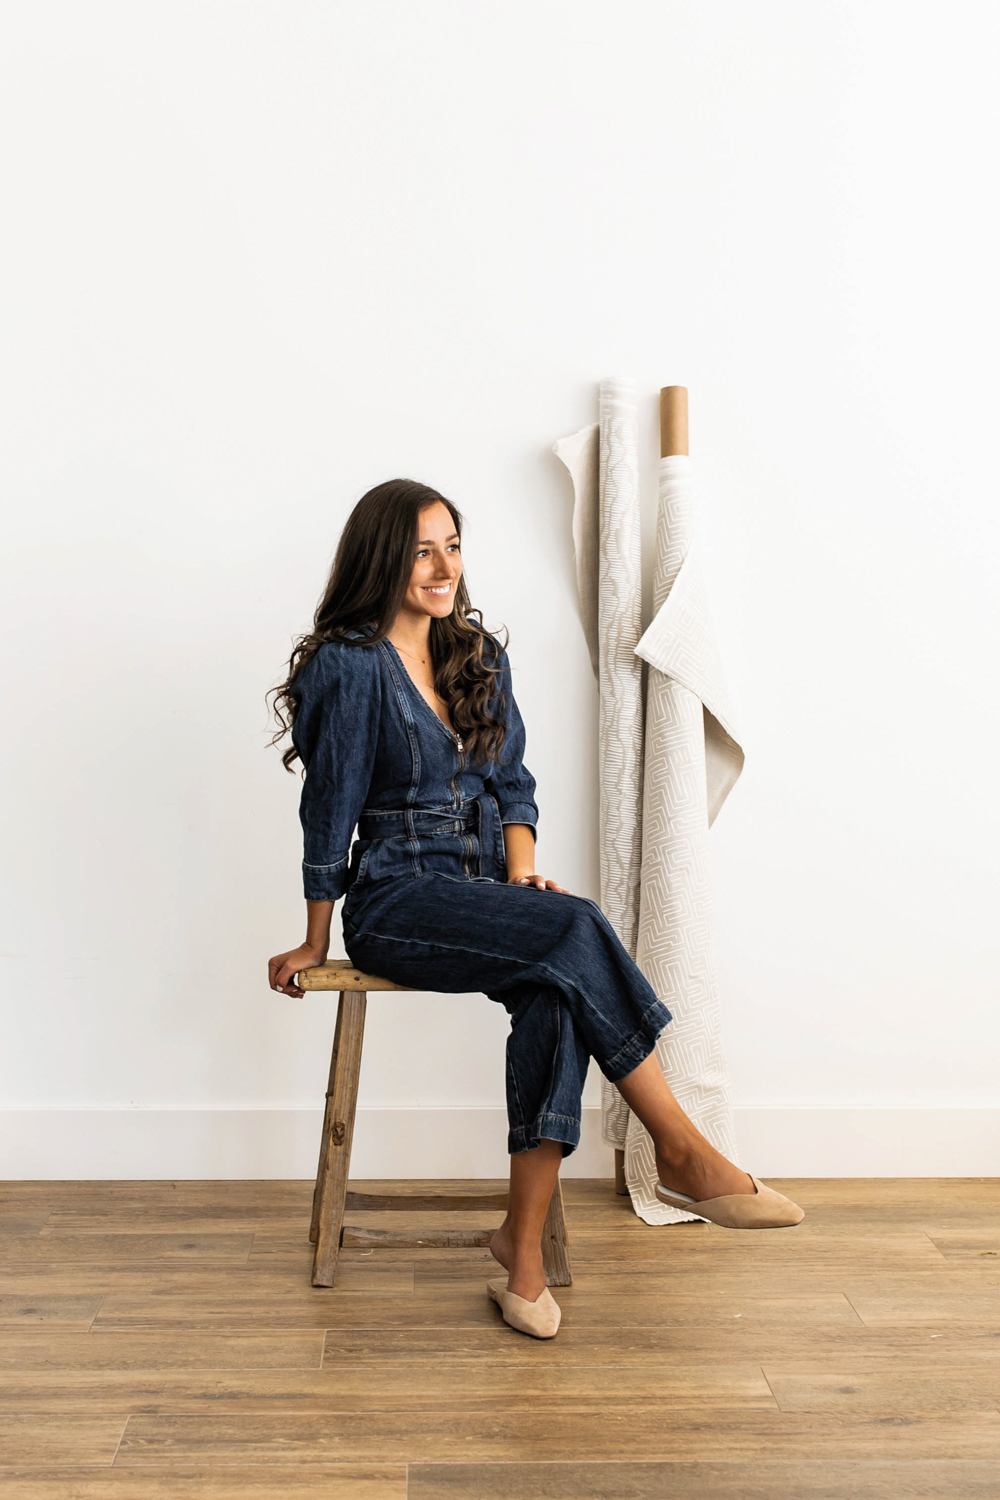 Portrait of Amy Weisberg sitting on a stool with rolls of white fabric behind her